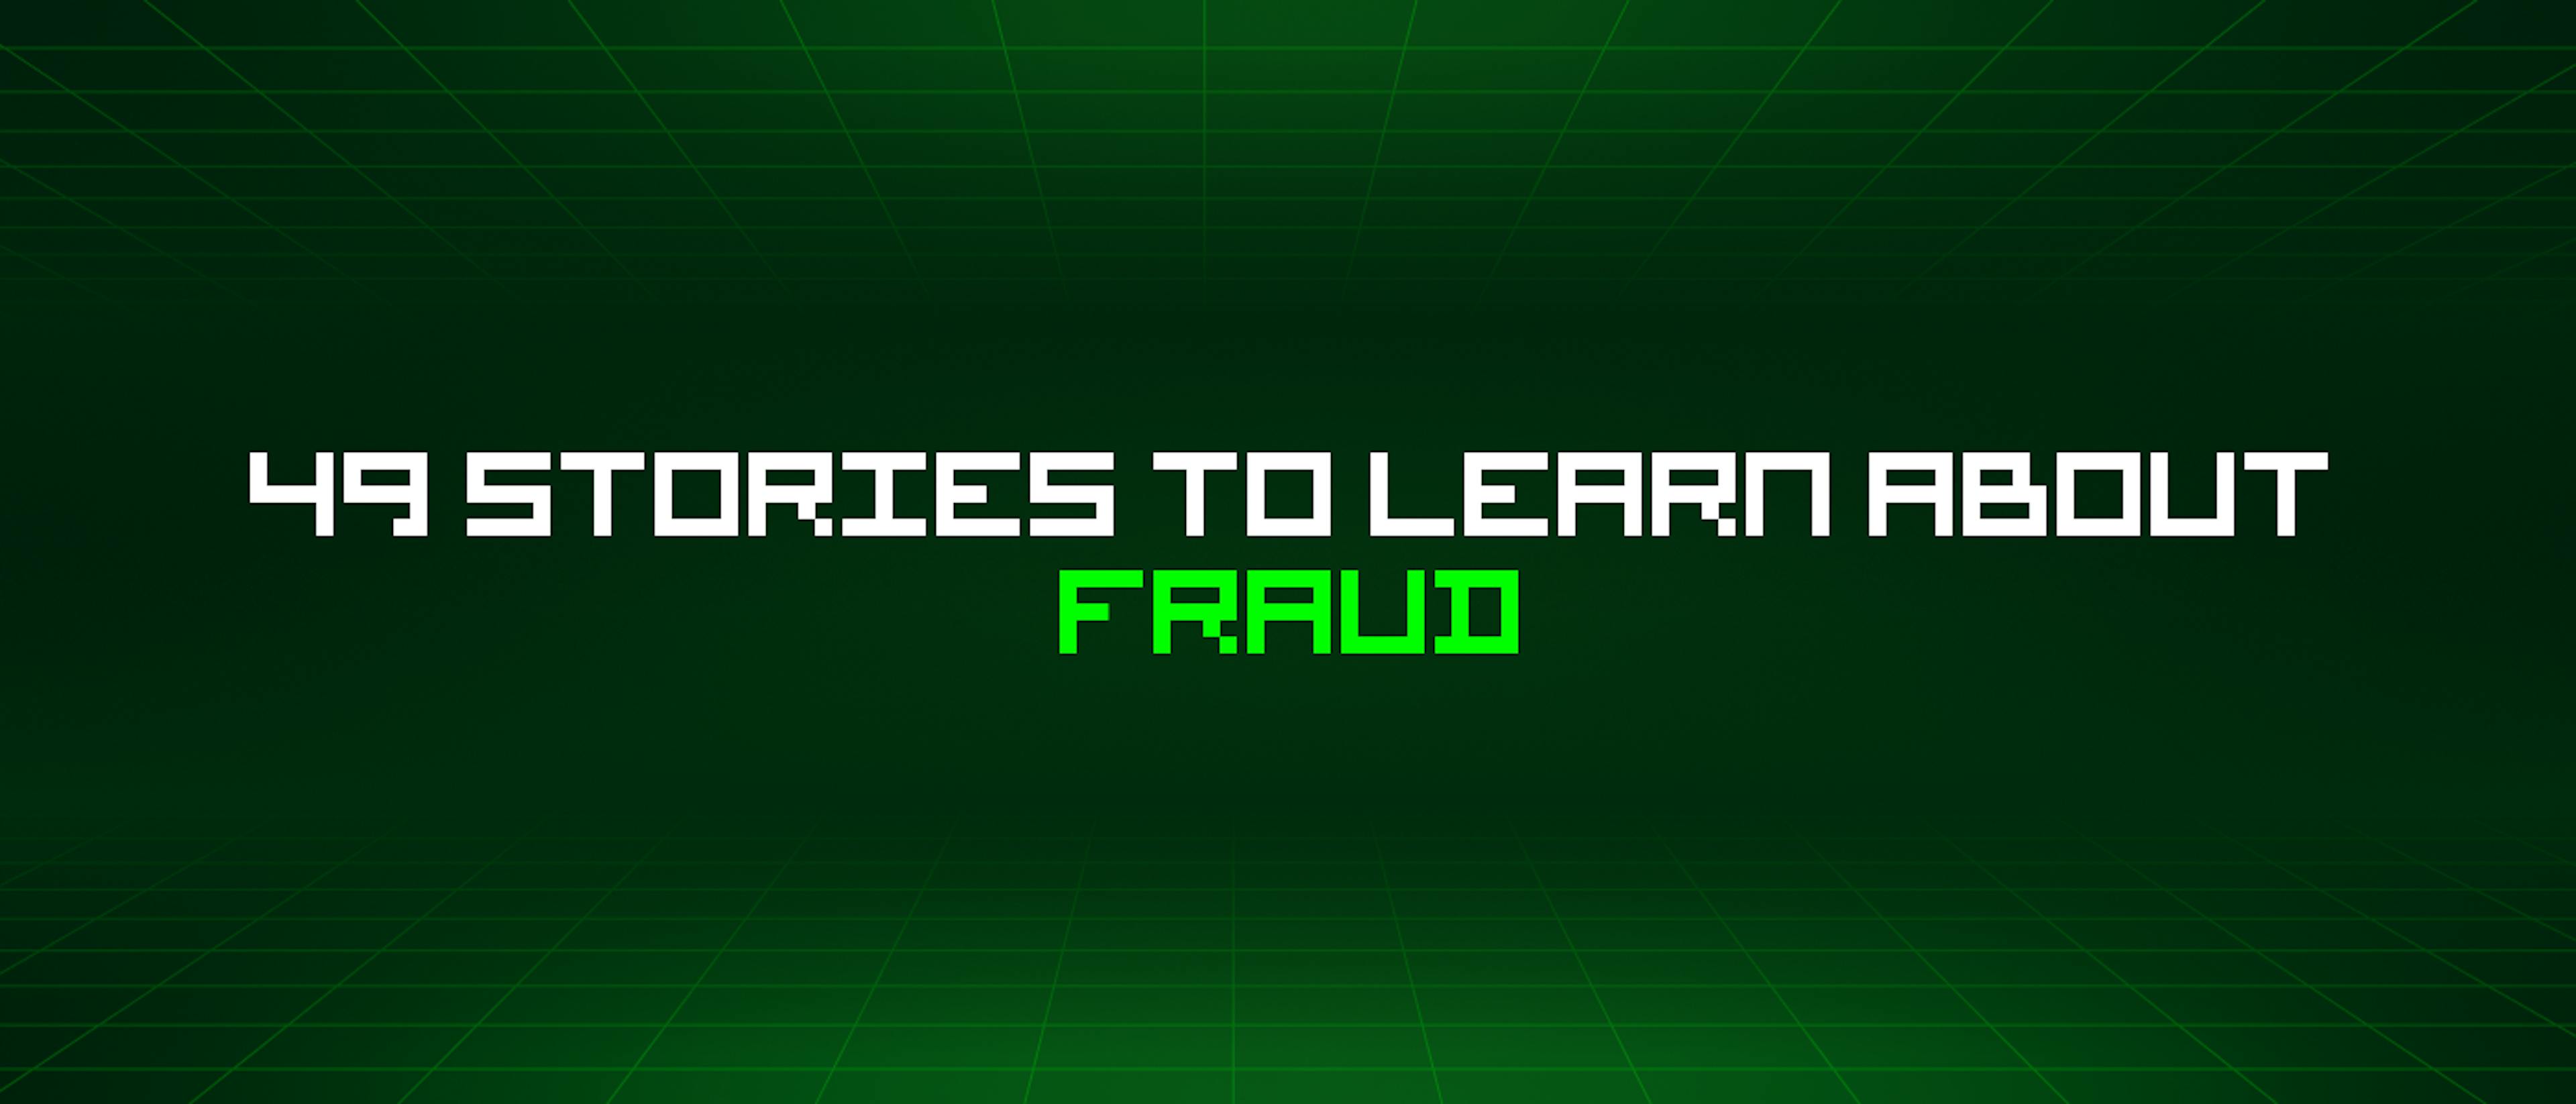 featured image - 49 Stories To Learn About Fraud